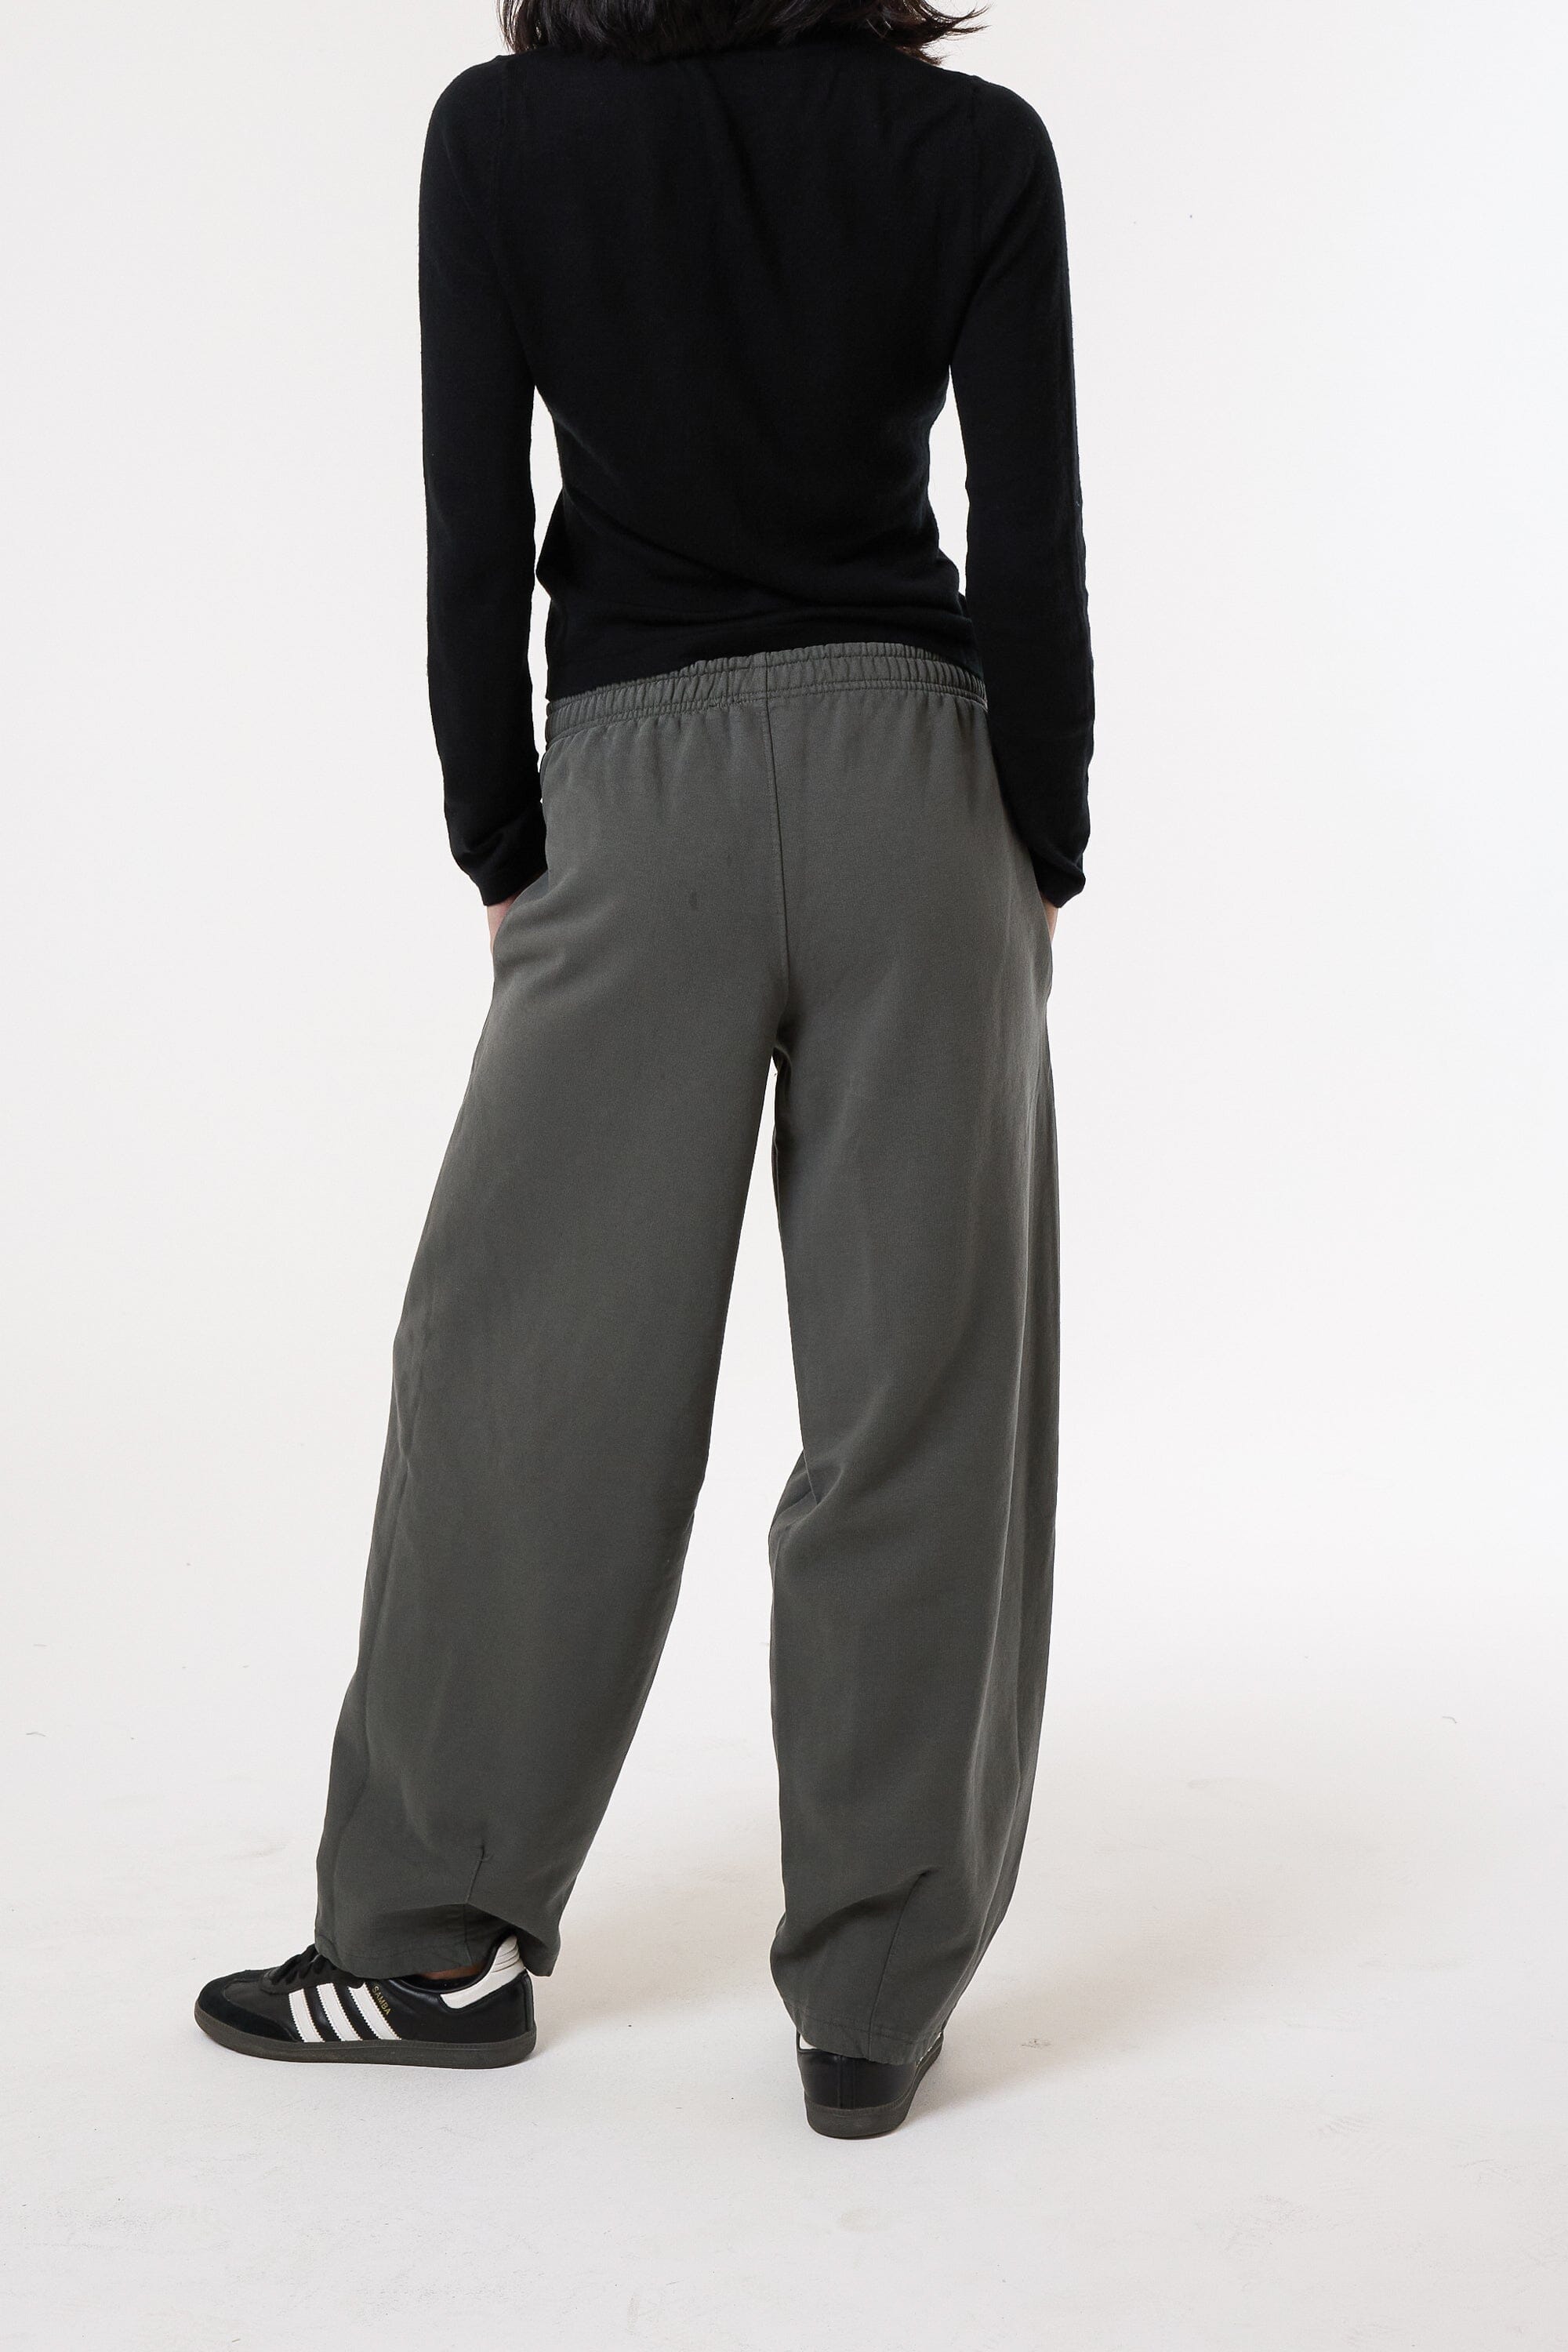 Arts and Industrial Track Pant - Merch Black